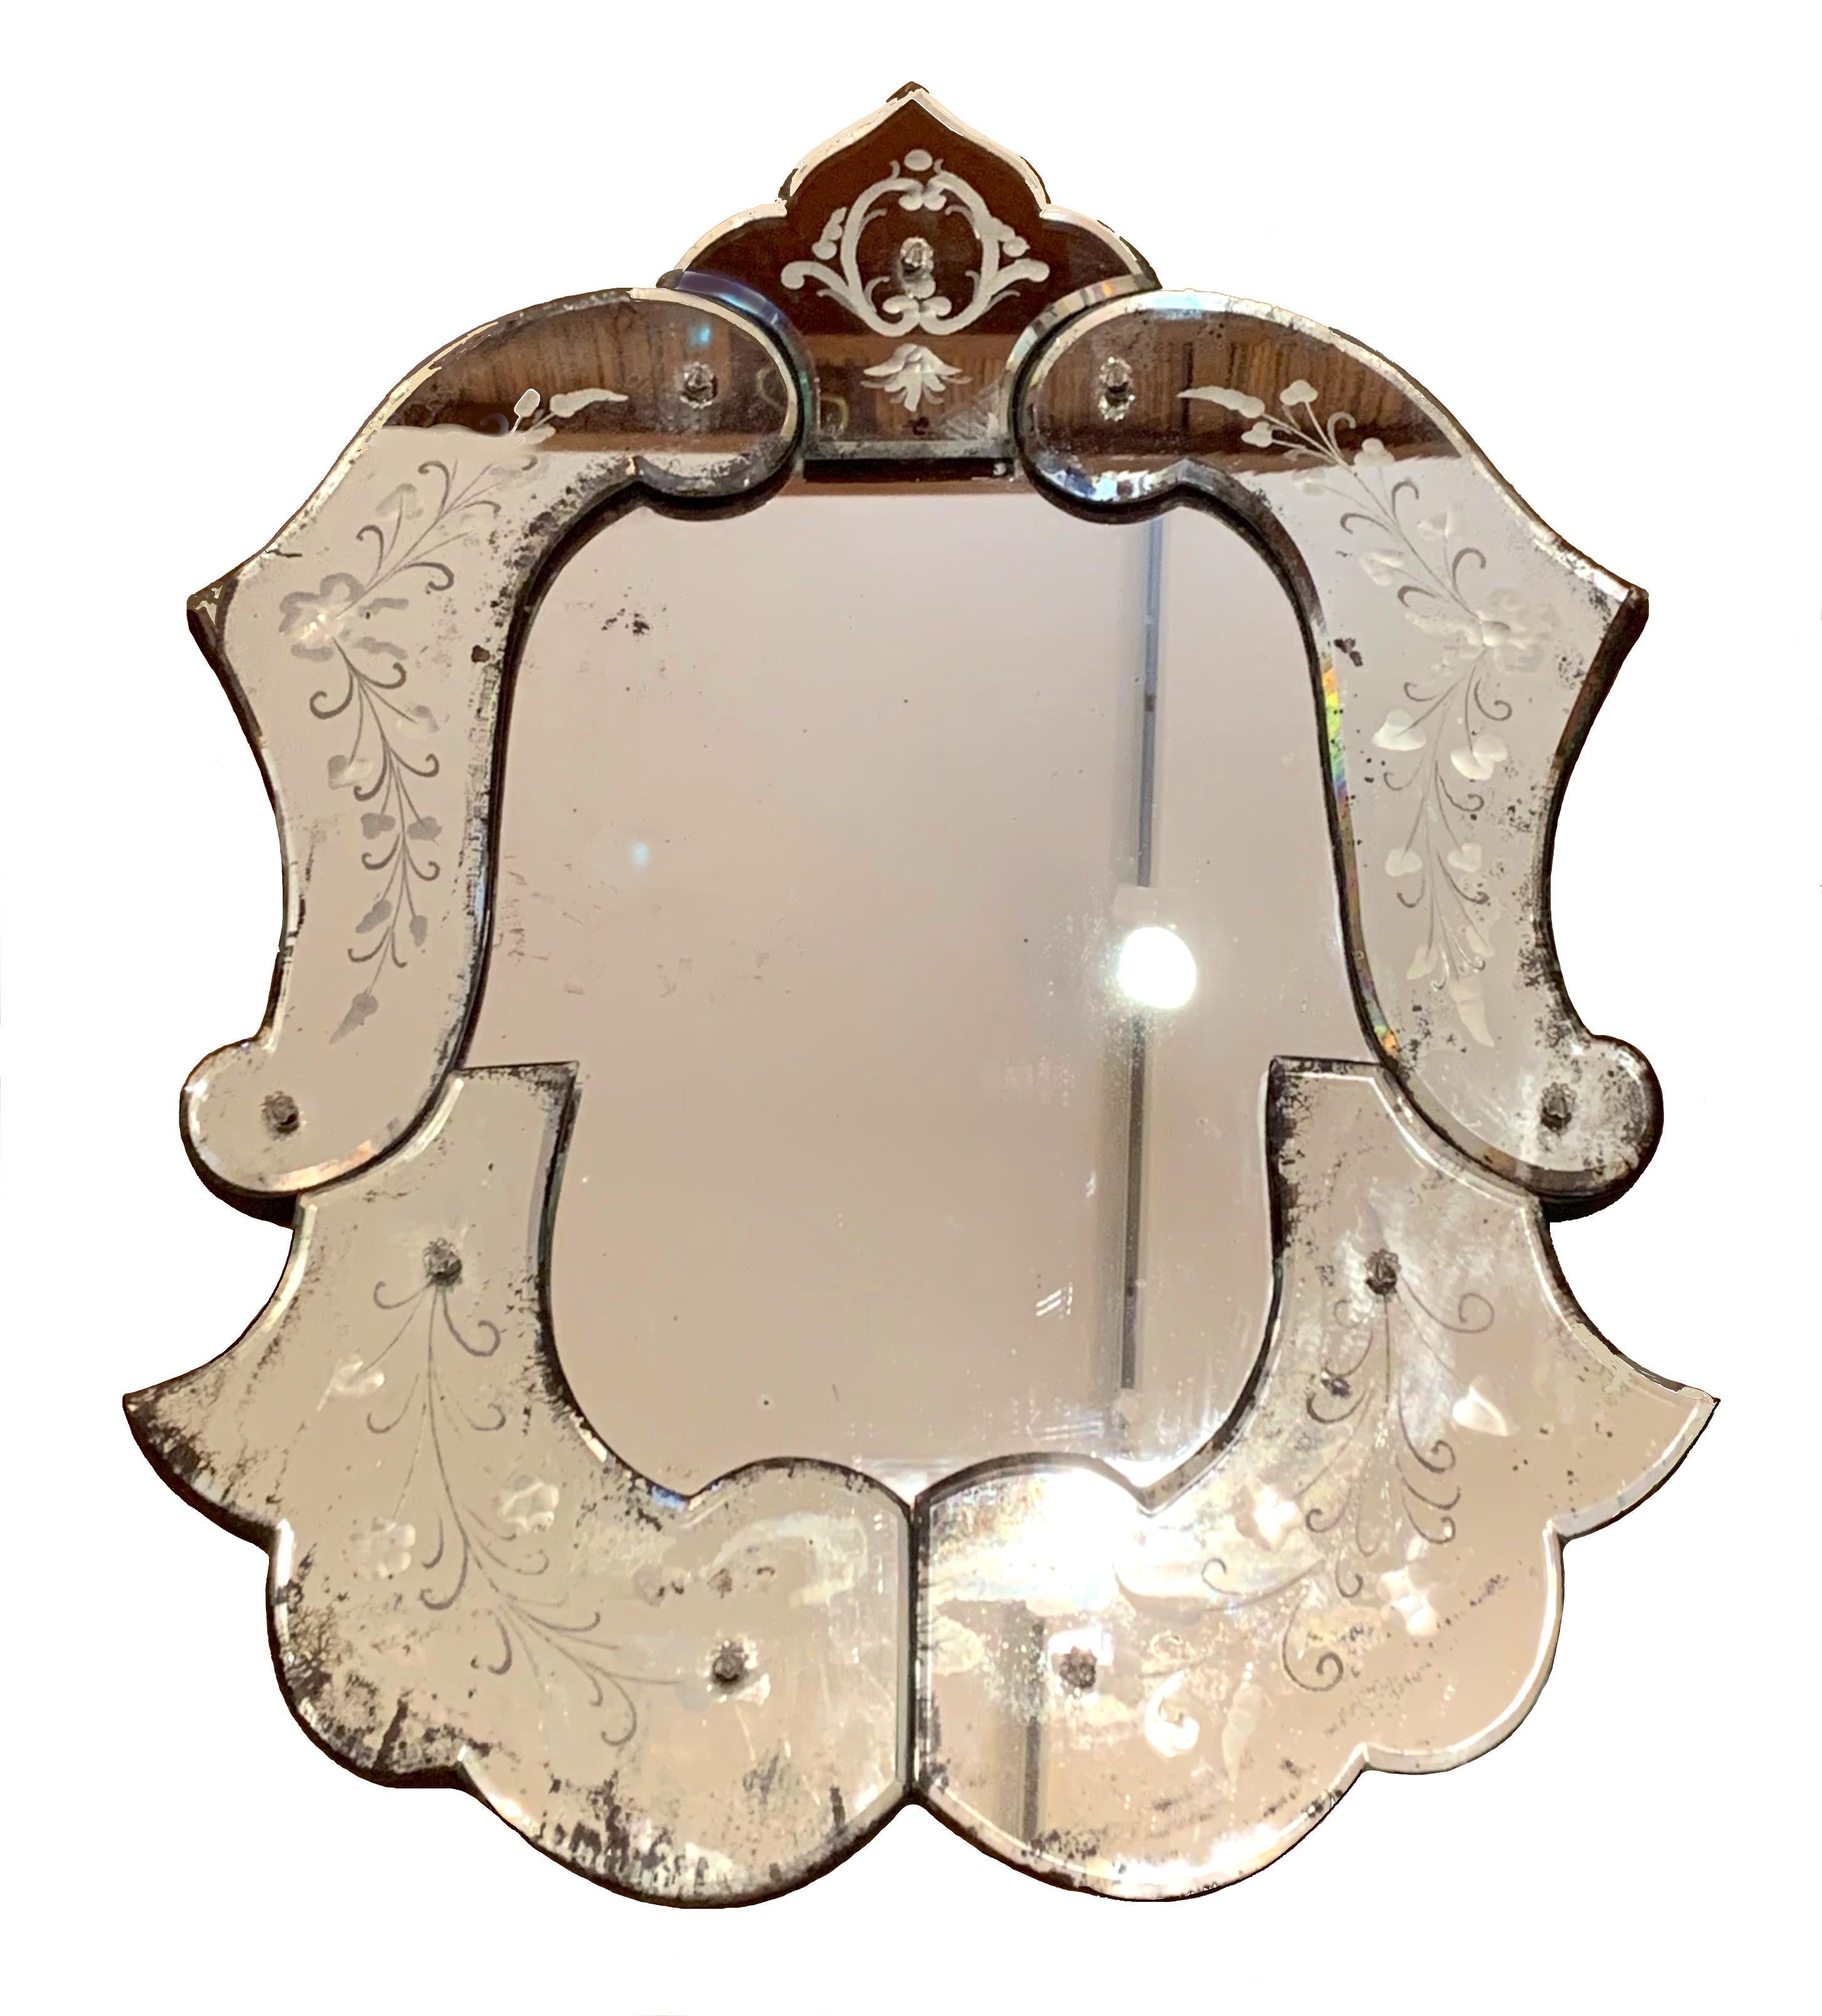 This elegant Belle Époque Venetian wall mirror is finely decorated with etched garlands of ivy tied together with ribbons tied to a bow. The glas is in fine order and original condition. It is mounted on wood and backed with card
The glass shows